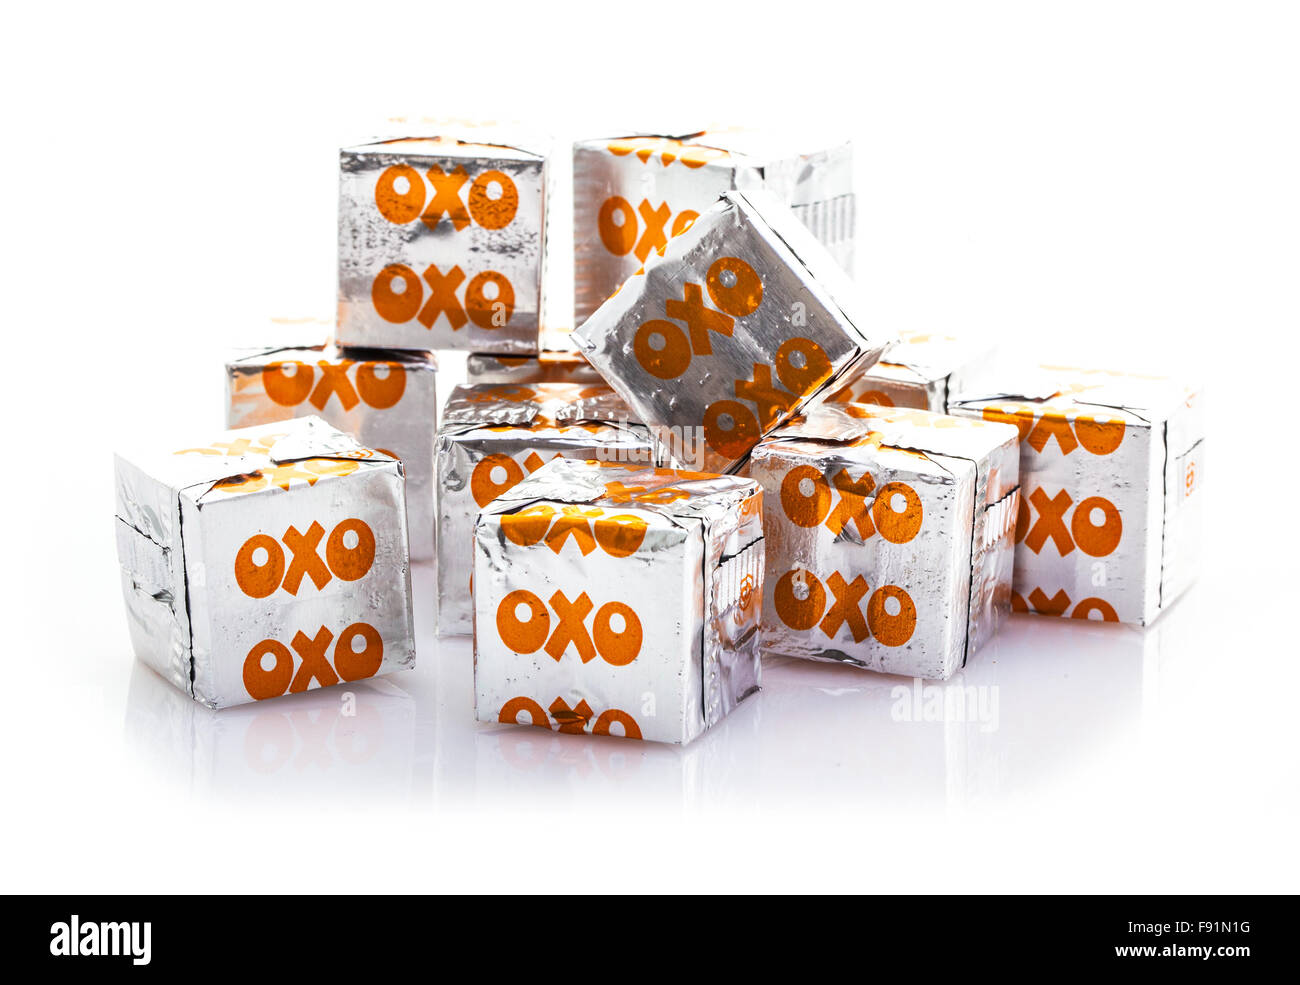 Chicken OXO stock cubes on a White Background Stock Photo